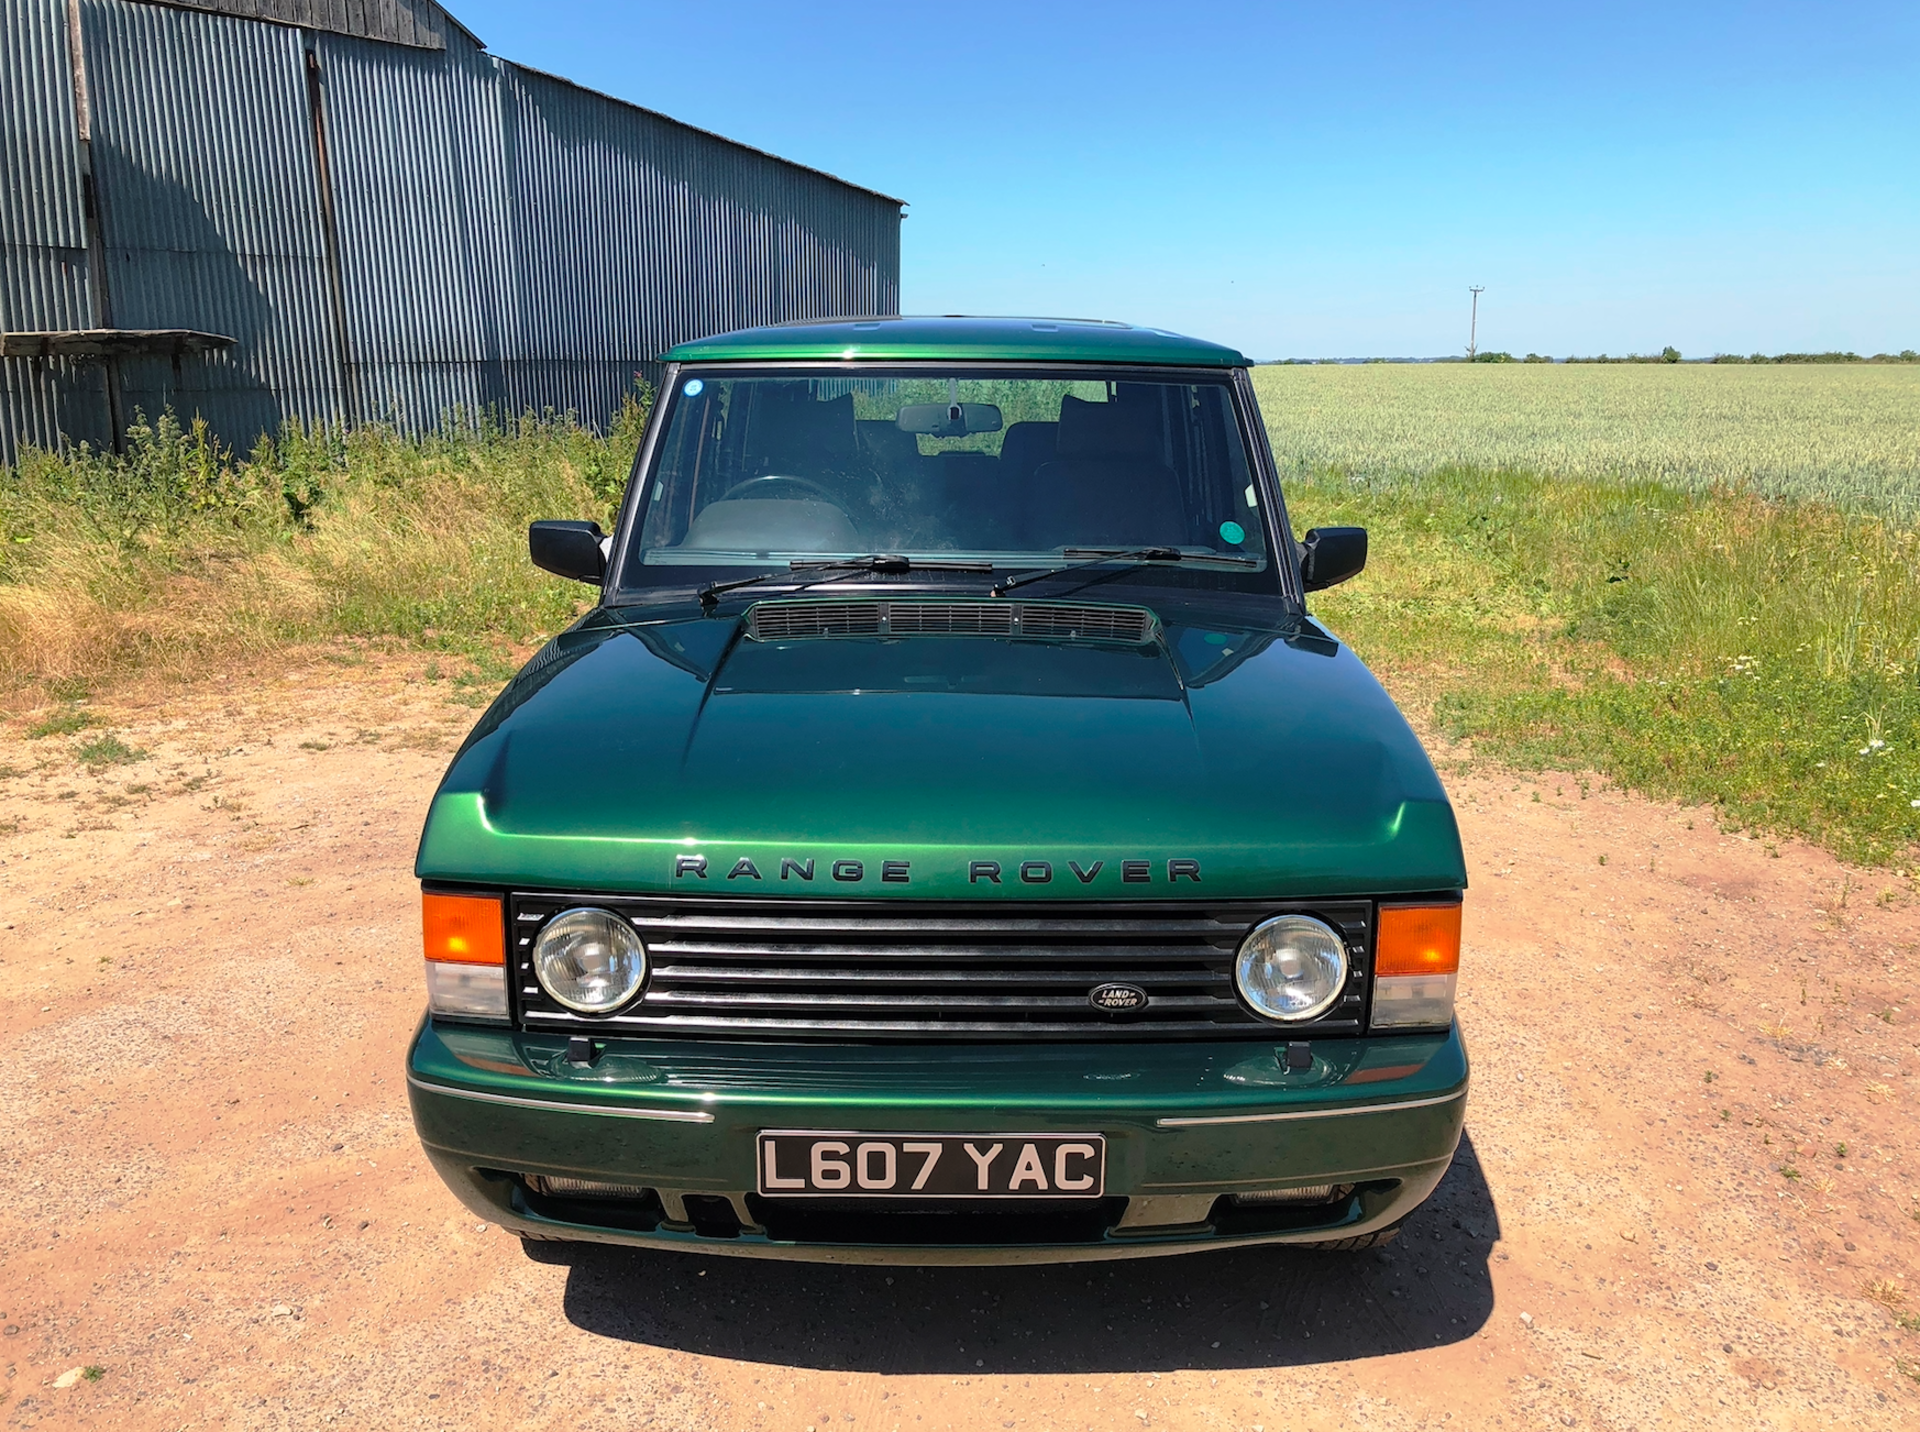 Range Rover, Classic Vogue LSE - Image 2 of 21